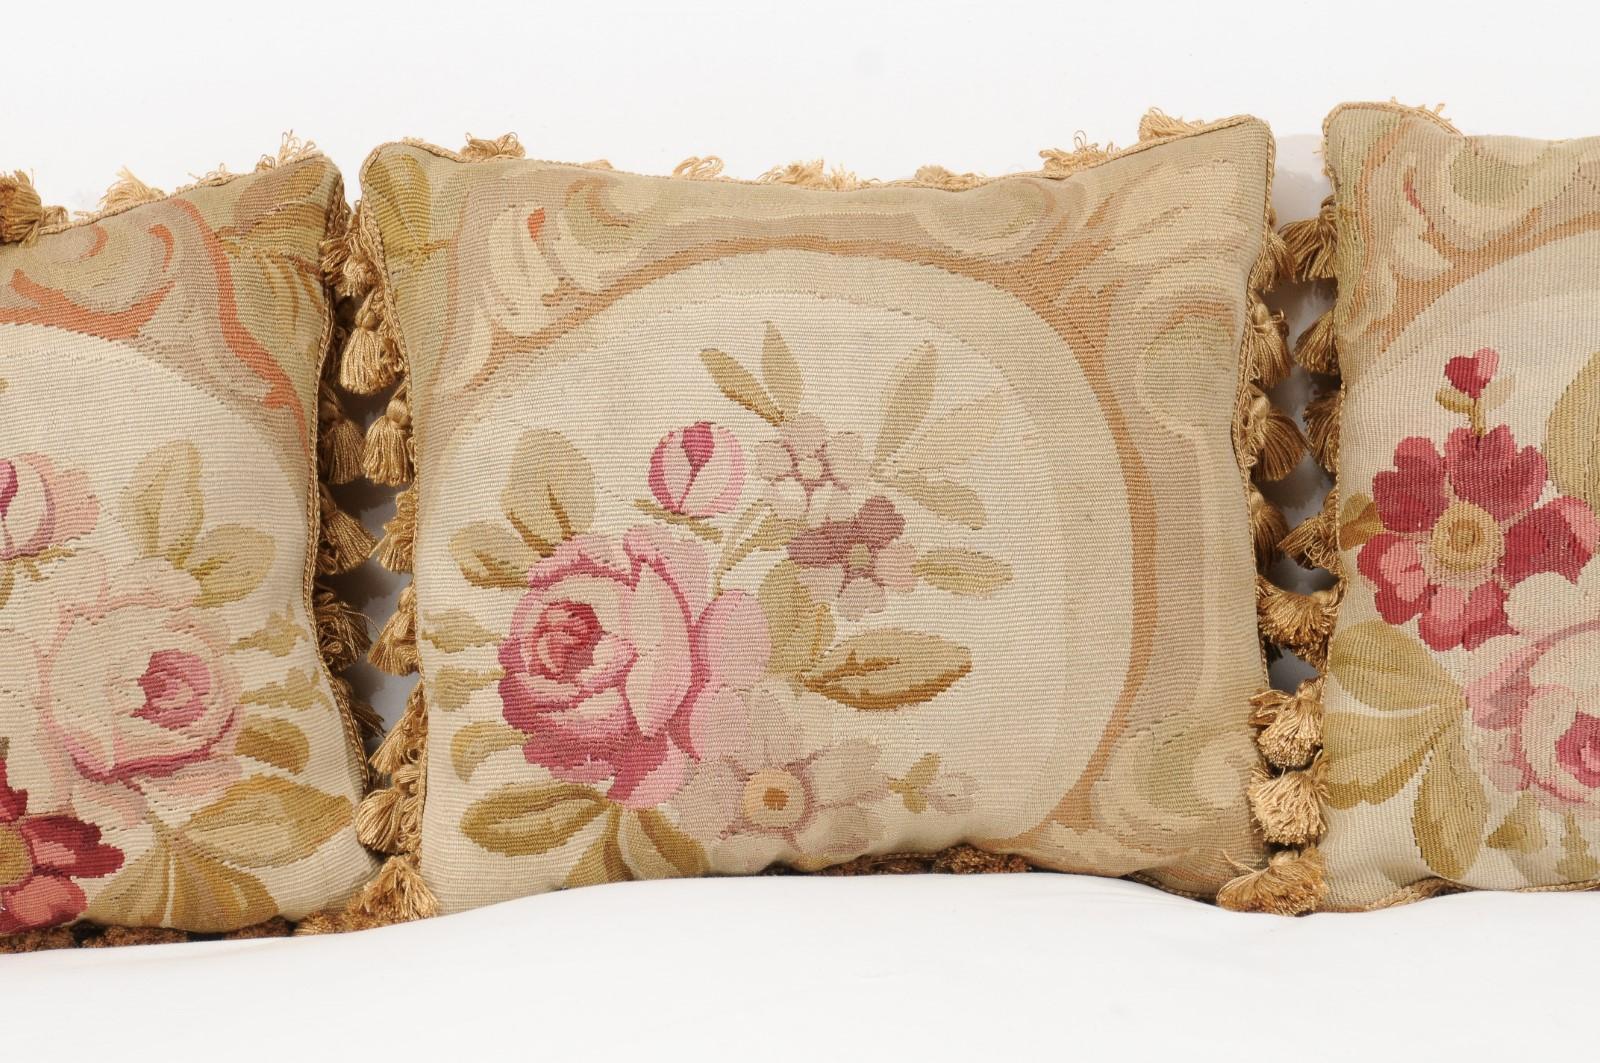 French 19th Century Aubusson Woven Tapestry Pillow with Roses and Tassels For Sale 1